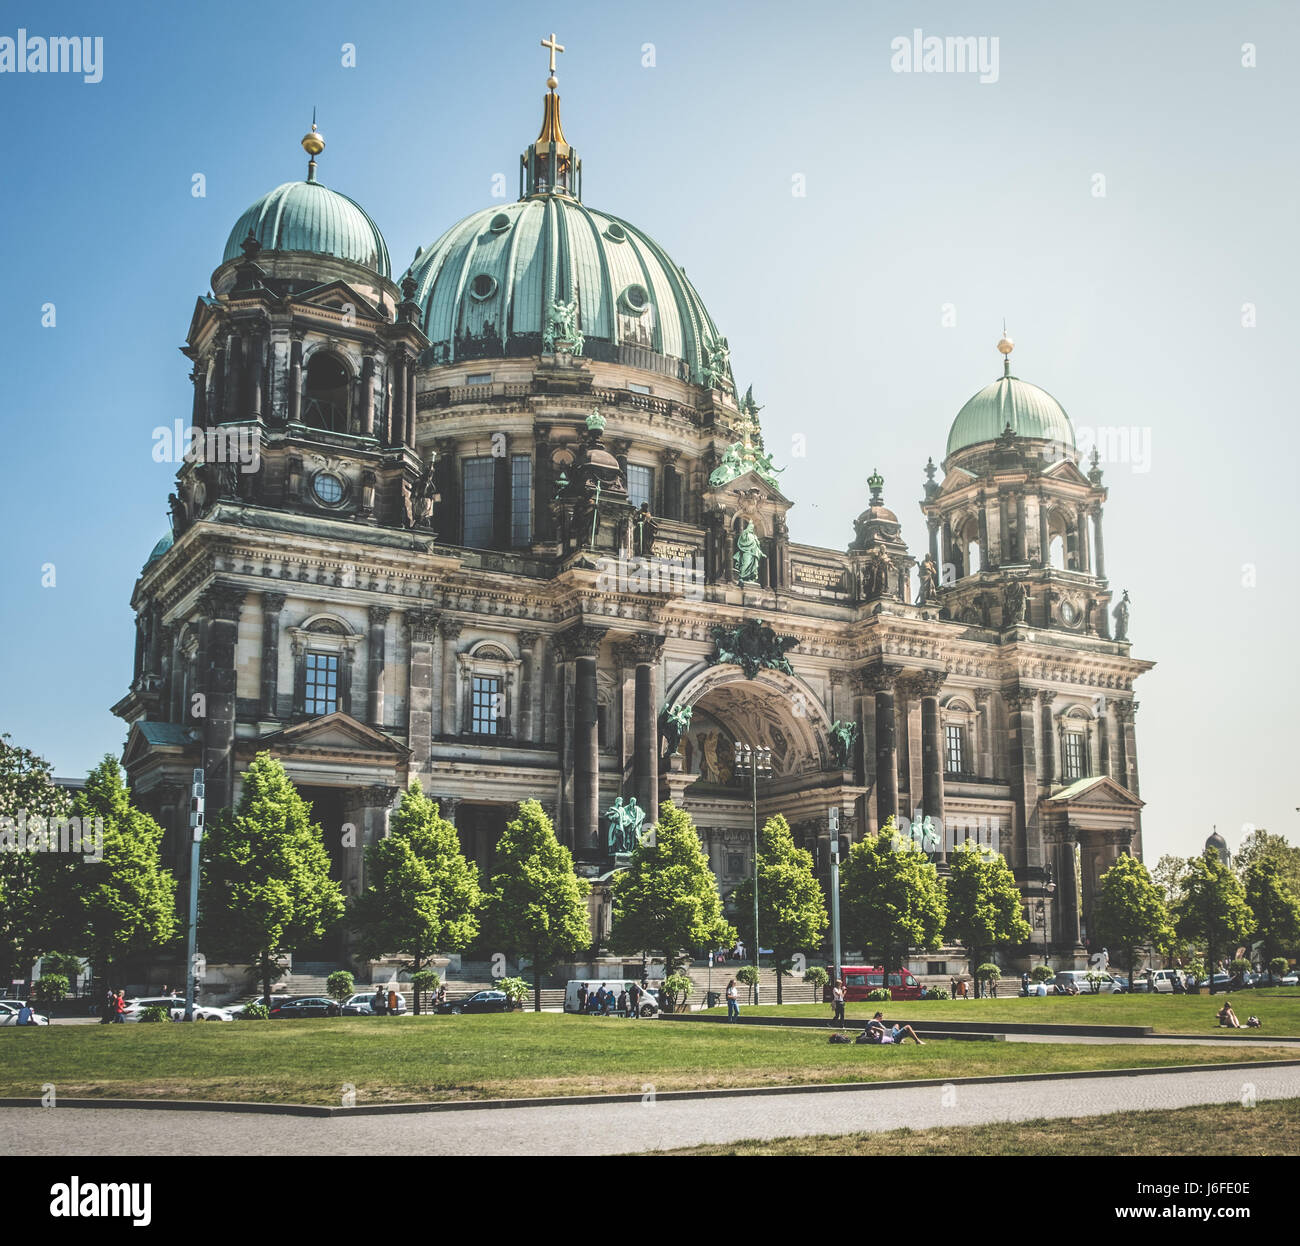 Berlin, Germany - may 19, 2017: The Berlin cathedral (Berliner Dom) in Berlin, Germany. Stock Photo